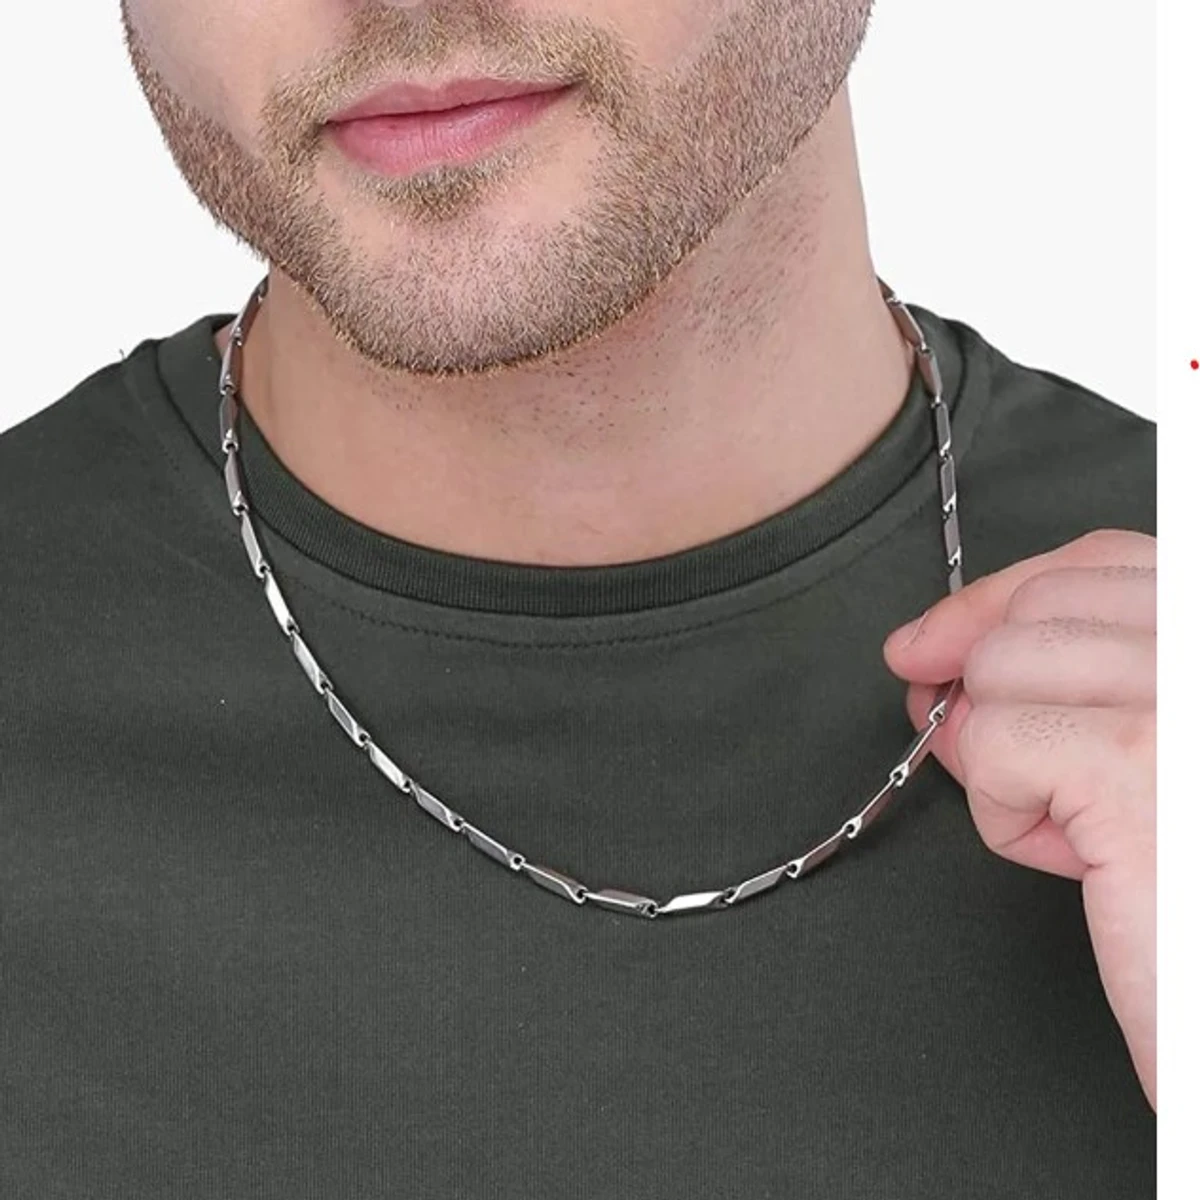 Classic Style Stainless Steel Black Rice Chain Necklace for Men